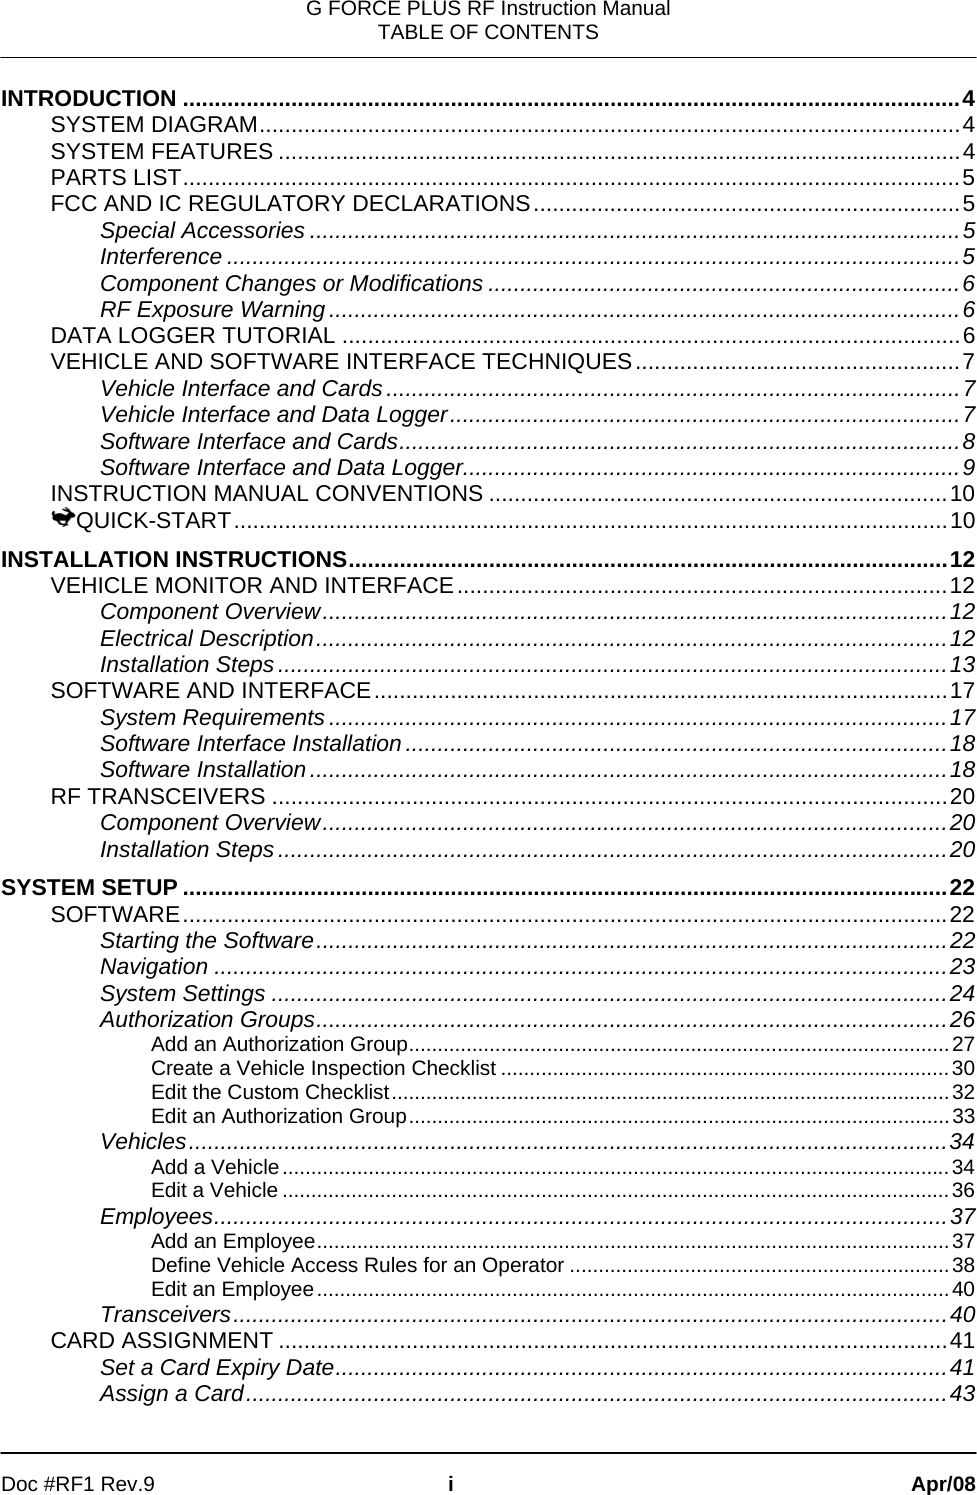 G FORCE PLUS RF Instruction Manual TABLE OF CONTENTS   Doc #RF1 Rev.9  i Apr/08 INTRODUCTION ..........................................................................................................................4 SYSTEM DIAGRAM..............................................................................................................4 SYSTEM FEATURES ...........................................................................................................4 PARTS LIST..........................................................................................................................5 FCC AND IC REGULATORY DECLARATIONS...................................................................5 Special Accessories ......................................................................................................5 Interference ...................................................................................................................5 Component Changes or Modifications ..........................................................................6 RF Exposure Warning...................................................................................................6 DATA LOGGER TUTORIAL .................................................................................................6 VEHICLE AND SOFTWARE INTERFACE TECHNIQUES...................................................7 Vehicle Interface and Cards..........................................................................................7 Vehicle Interface and Data Logger................................................................................7 Software Interface and Cards........................................................................................8 Software Interface and Data Logger..............................................................................9 INSTRUCTION MANUAL CONVENTIONS ........................................................................10 QUICK-START................................................................................................................10 INSTALLATION INSTRUCTIONS..............................................................................................12 VEHICLE MONITOR AND INTERFACE.............................................................................12 Component Overview..................................................................................................12 Electrical Description...................................................................................................12 Installation Steps.........................................................................................................13 SOFTWARE AND INTERFACE..........................................................................................17 System Requirements.................................................................................................17 Software Interface Installation.....................................................................................18 Software Installation....................................................................................................18 RF TRANSCEIVERS ..........................................................................................................20 Component Overview..................................................................................................20 Installation Steps.........................................................................................................20 SYSTEM SETUP ........................................................................................................................22 SOFTWARE........................................................................................................................22 Starting the Software...................................................................................................22 Navigation ...................................................................................................................23 System Settings ..........................................................................................................24 Authorization Groups...................................................................................................26 Add an Authorization Group..............................................................................................27 Create a Vehicle Inspection Checklist ..............................................................................30 Edit the Custom Checklist.................................................................................................32 Edit an Authorization Group..............................................................................................33 Vehicles.......................................................................................................................34 Add a Vehicle....................................................................................................................34 Edit a Vehicle ....................................................................................................................36 Employees...................................................................................................................37 Add an Employee..............................................................................................................37 Define Vehicle Access Rules for an Operator ..................................................................38 Edit an Employee..............................................................................................................40 Transceivers................................................................................................................40 CARD ASSIGNMENT .........................................................................................................41 Set a Card Expiry Date................................................................................................41 Assign a Card..............................................................................................................43 